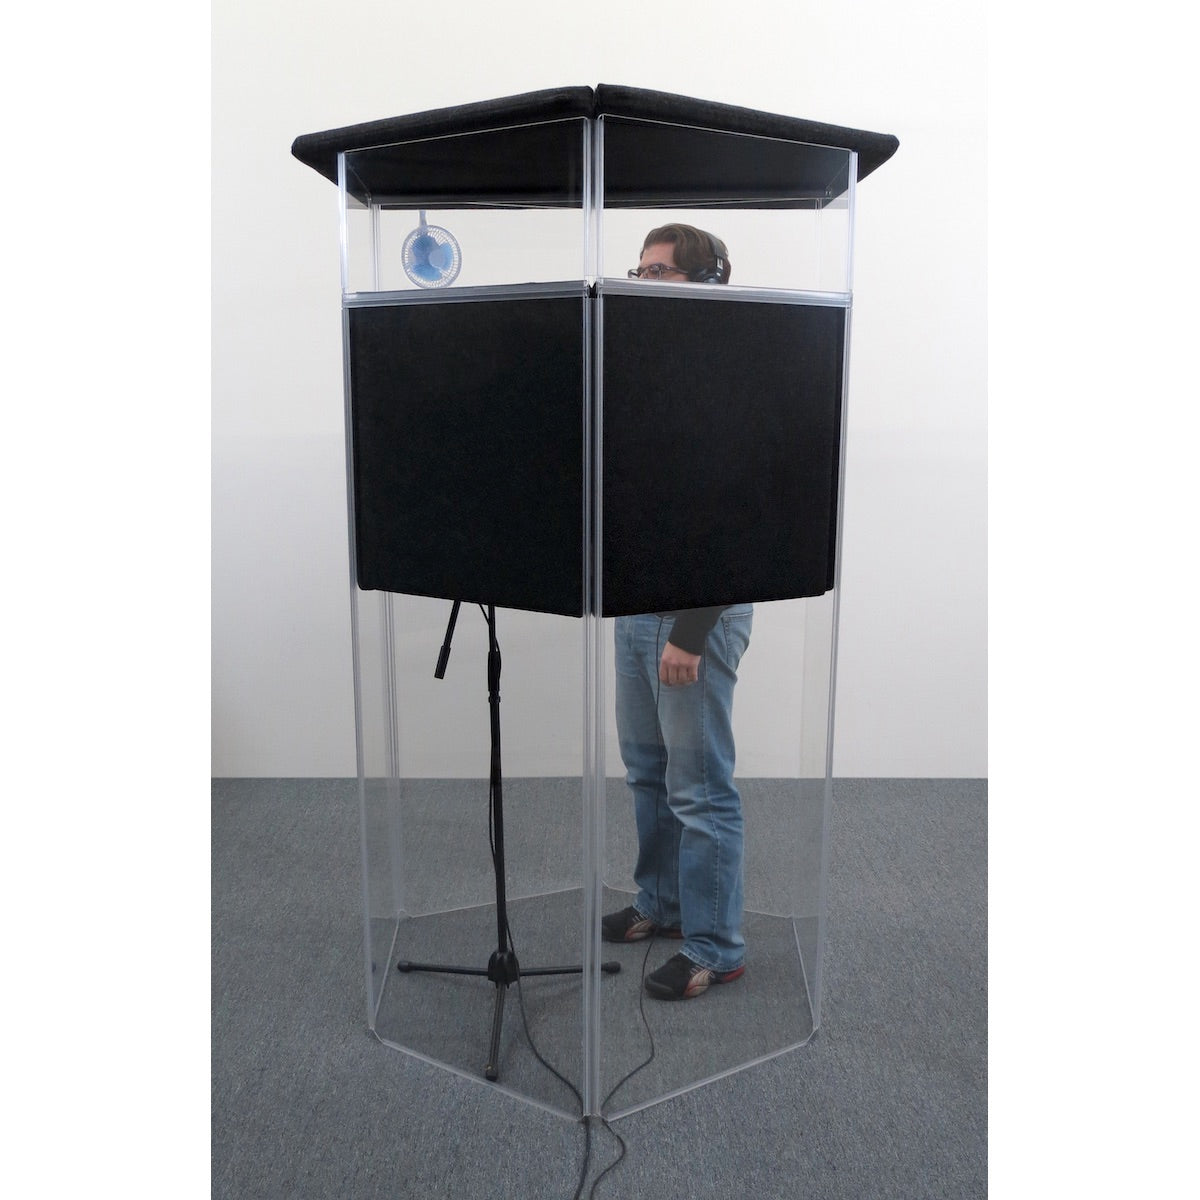 ClearSonic IPG - IsoPac G Vocal Isolation Booth Package, with person